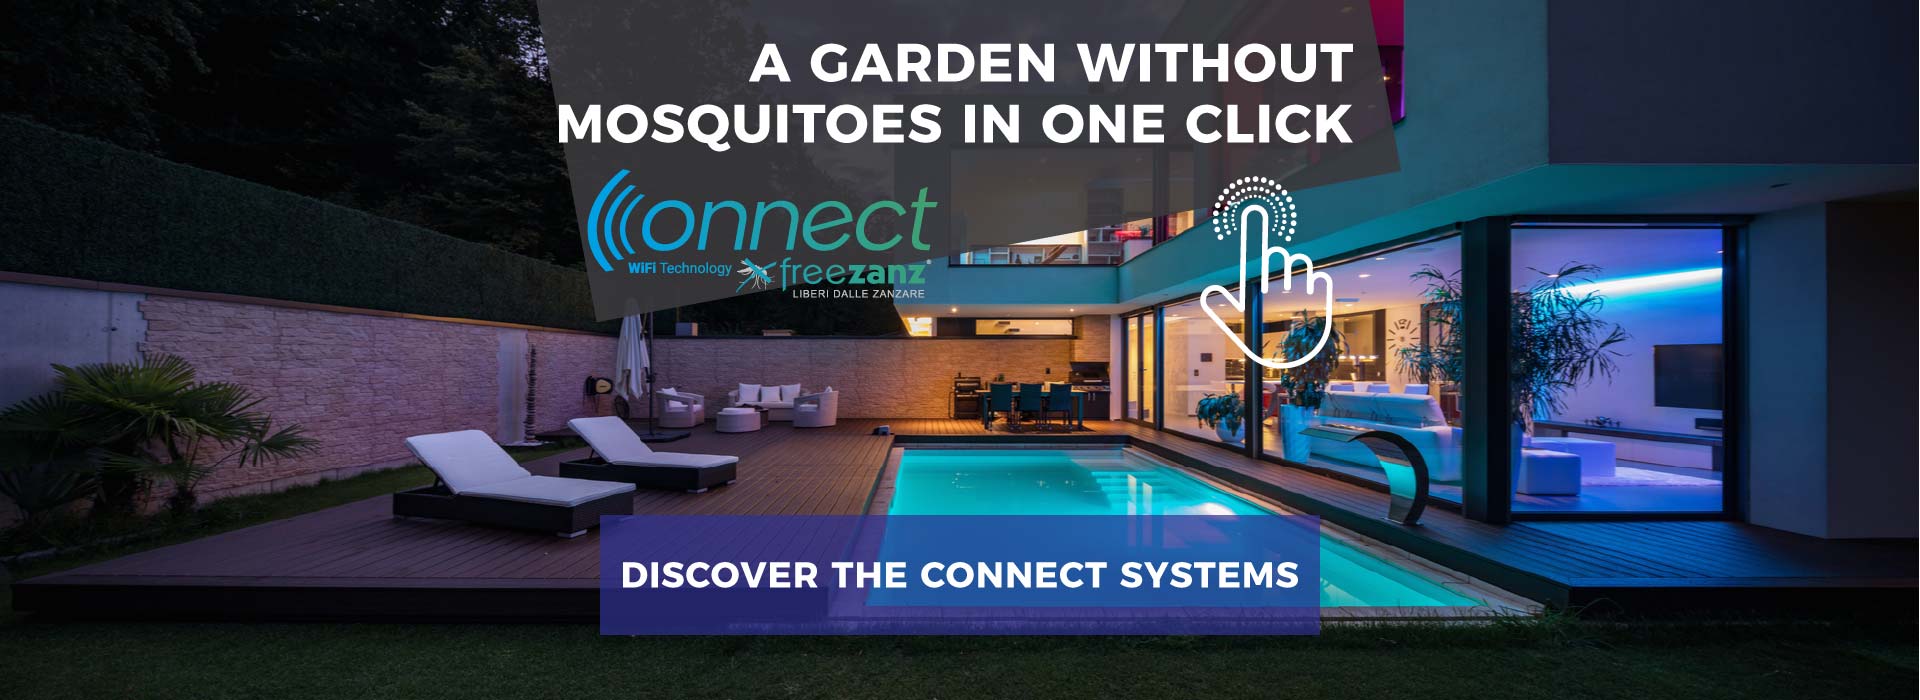 Automatic anti-mosquito mist systems for backyard